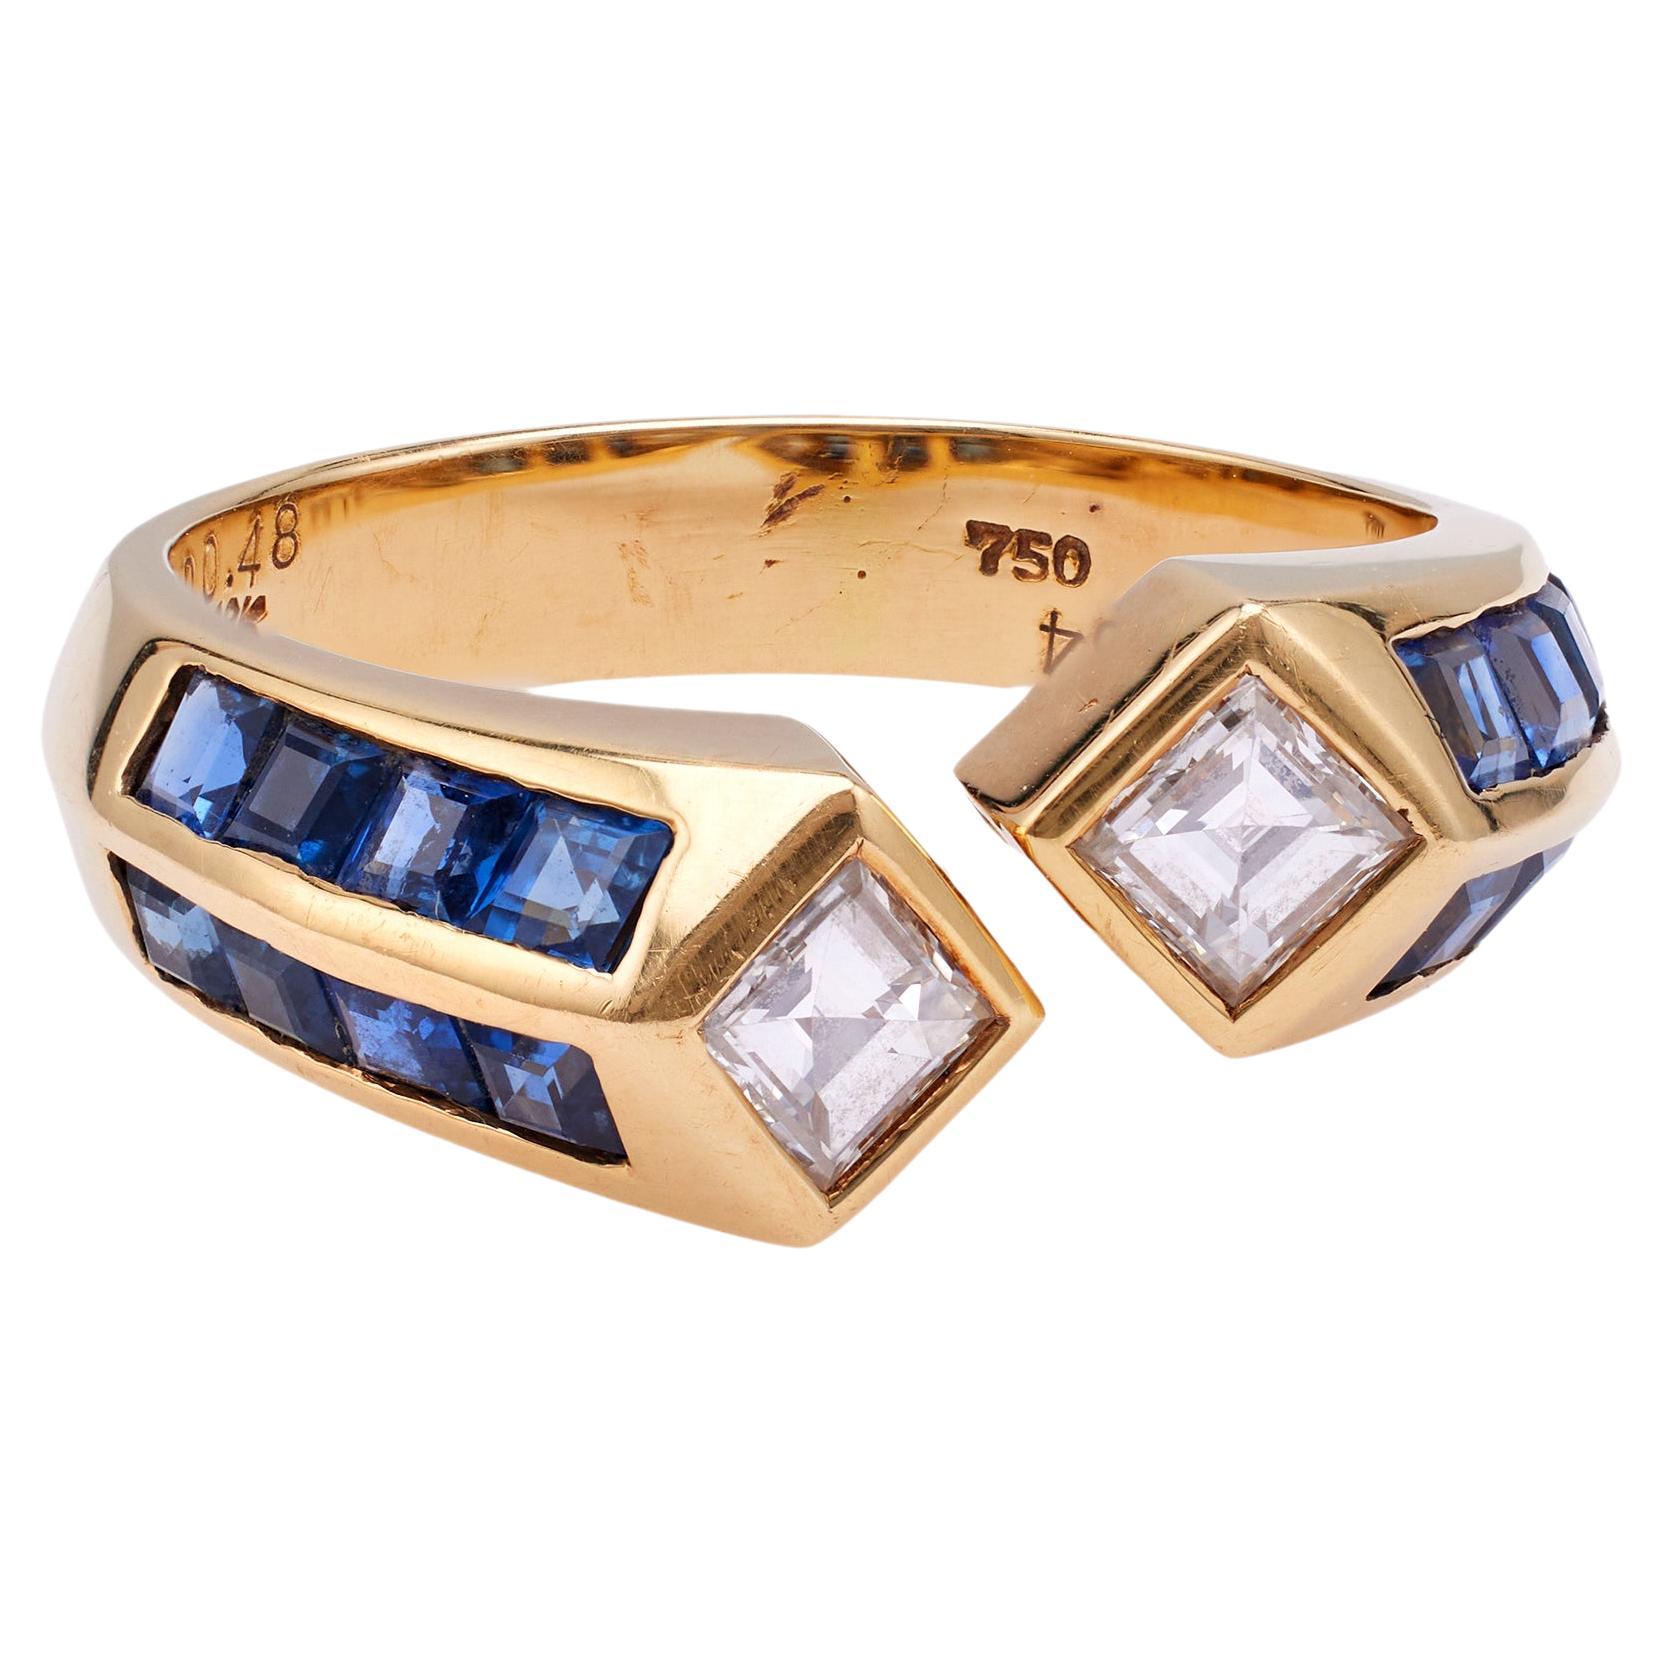 Vintage Diamond and Sapphire 18k Yellow Gold Ring